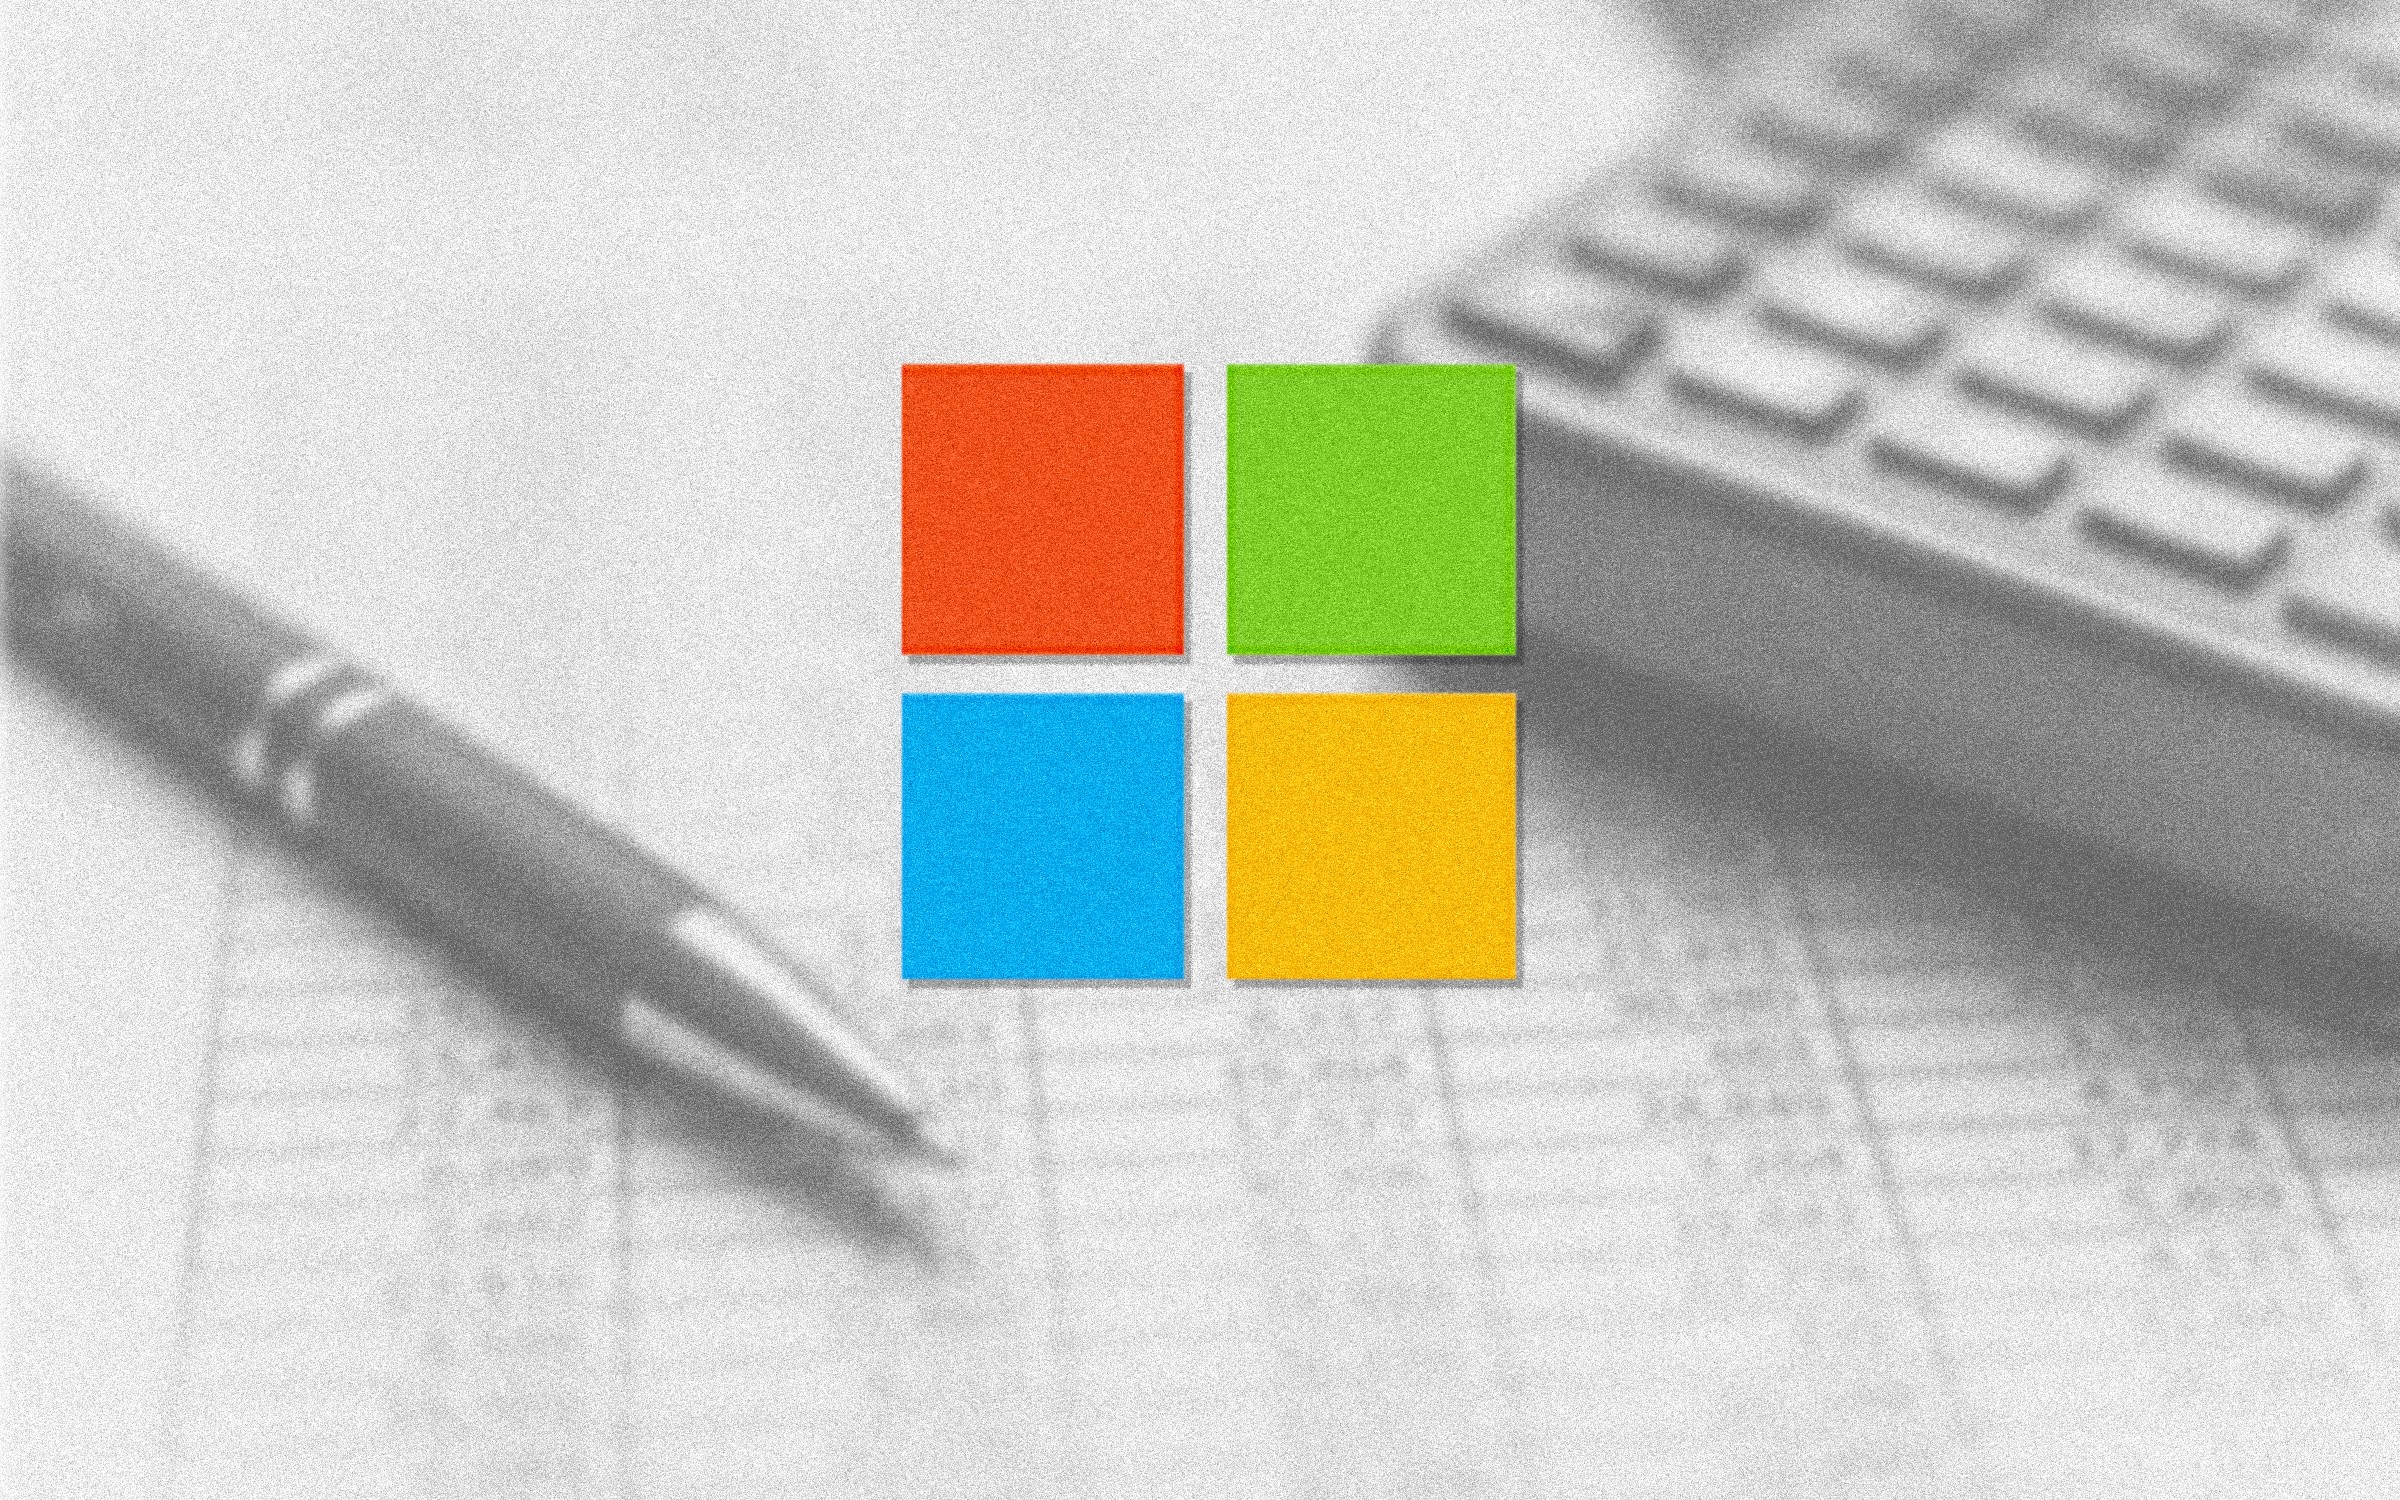 Microsoft logo over an image of a calculator, pen, and printed table chart.